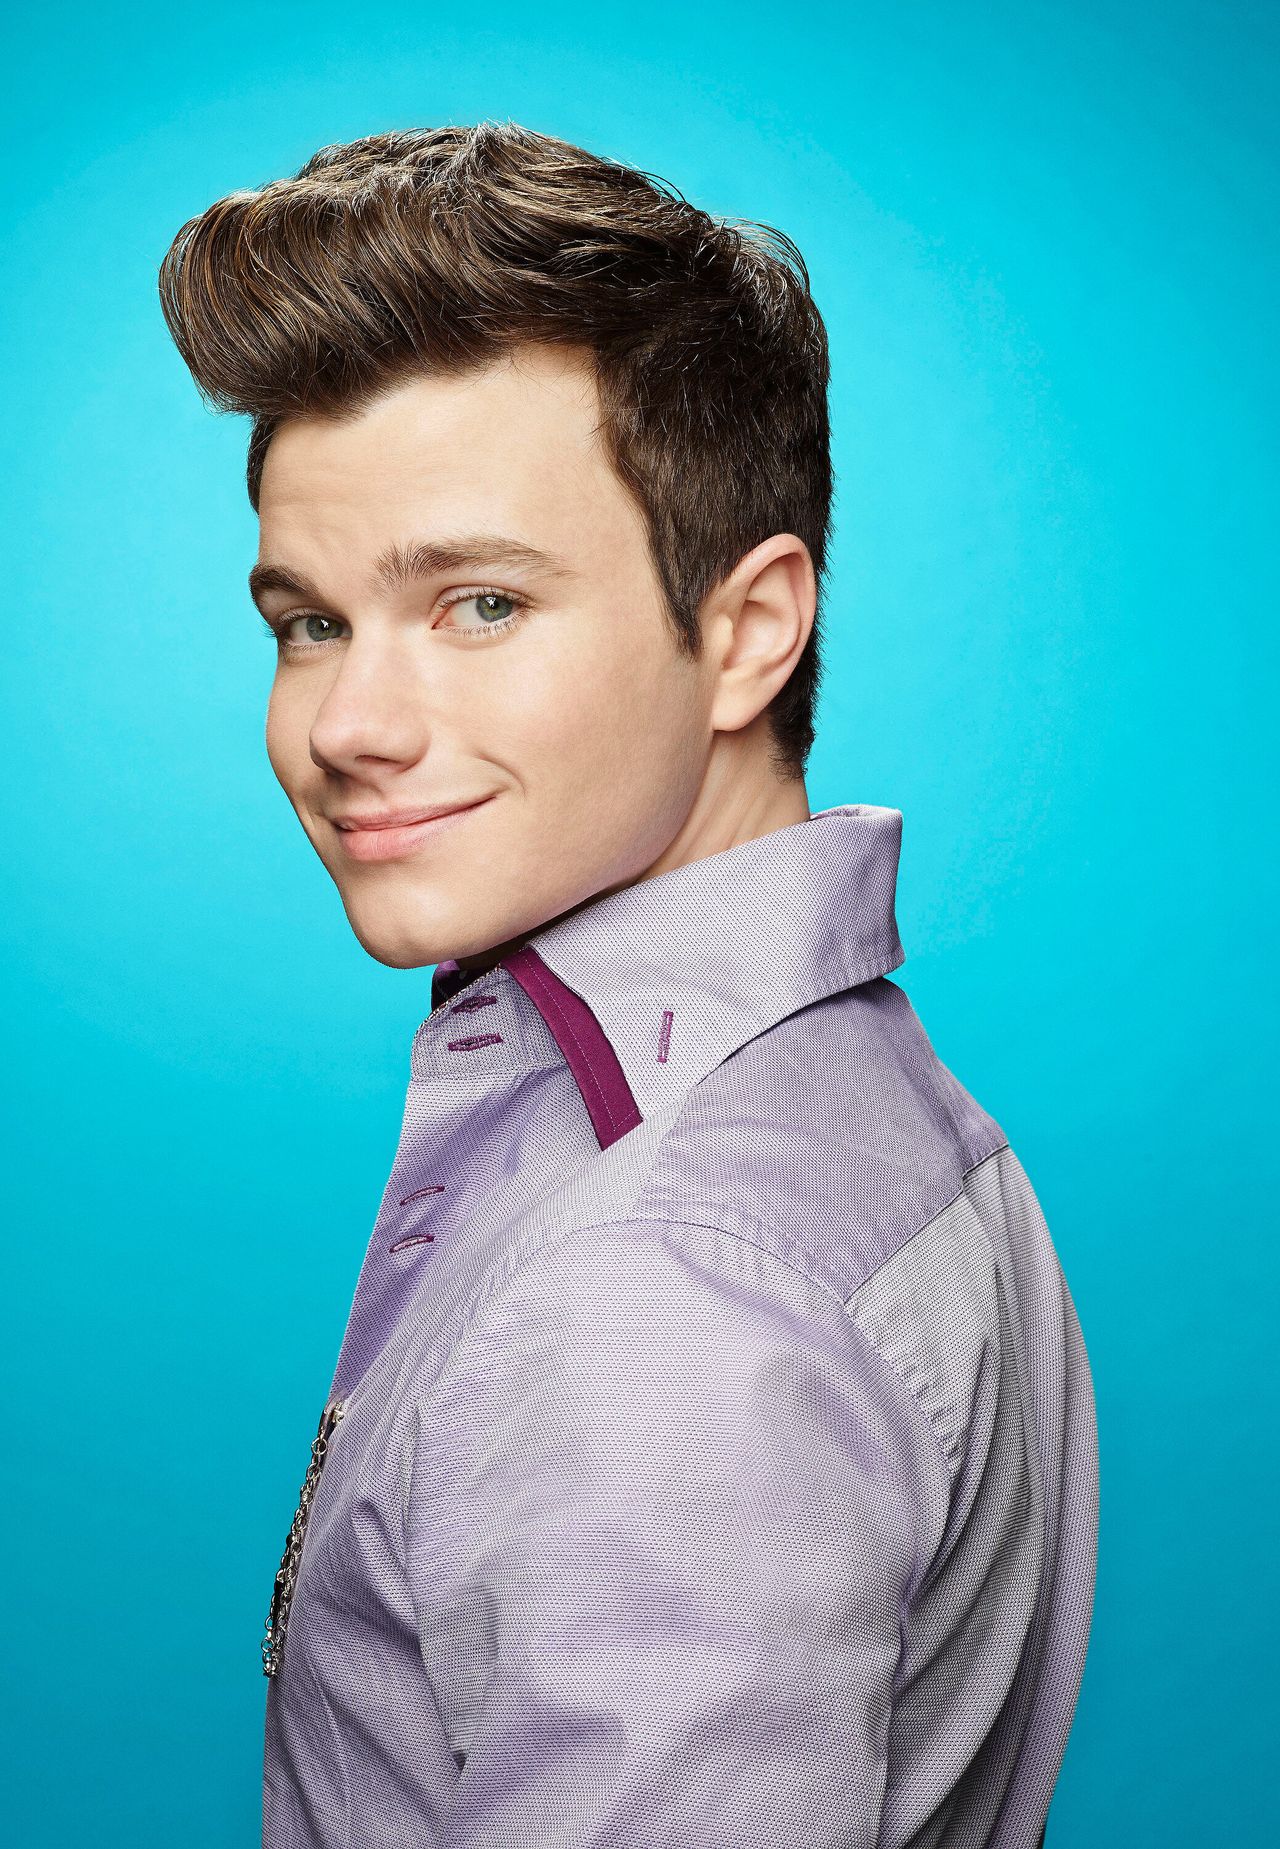 Chris Colfer played out and proud Kurt in Glee.